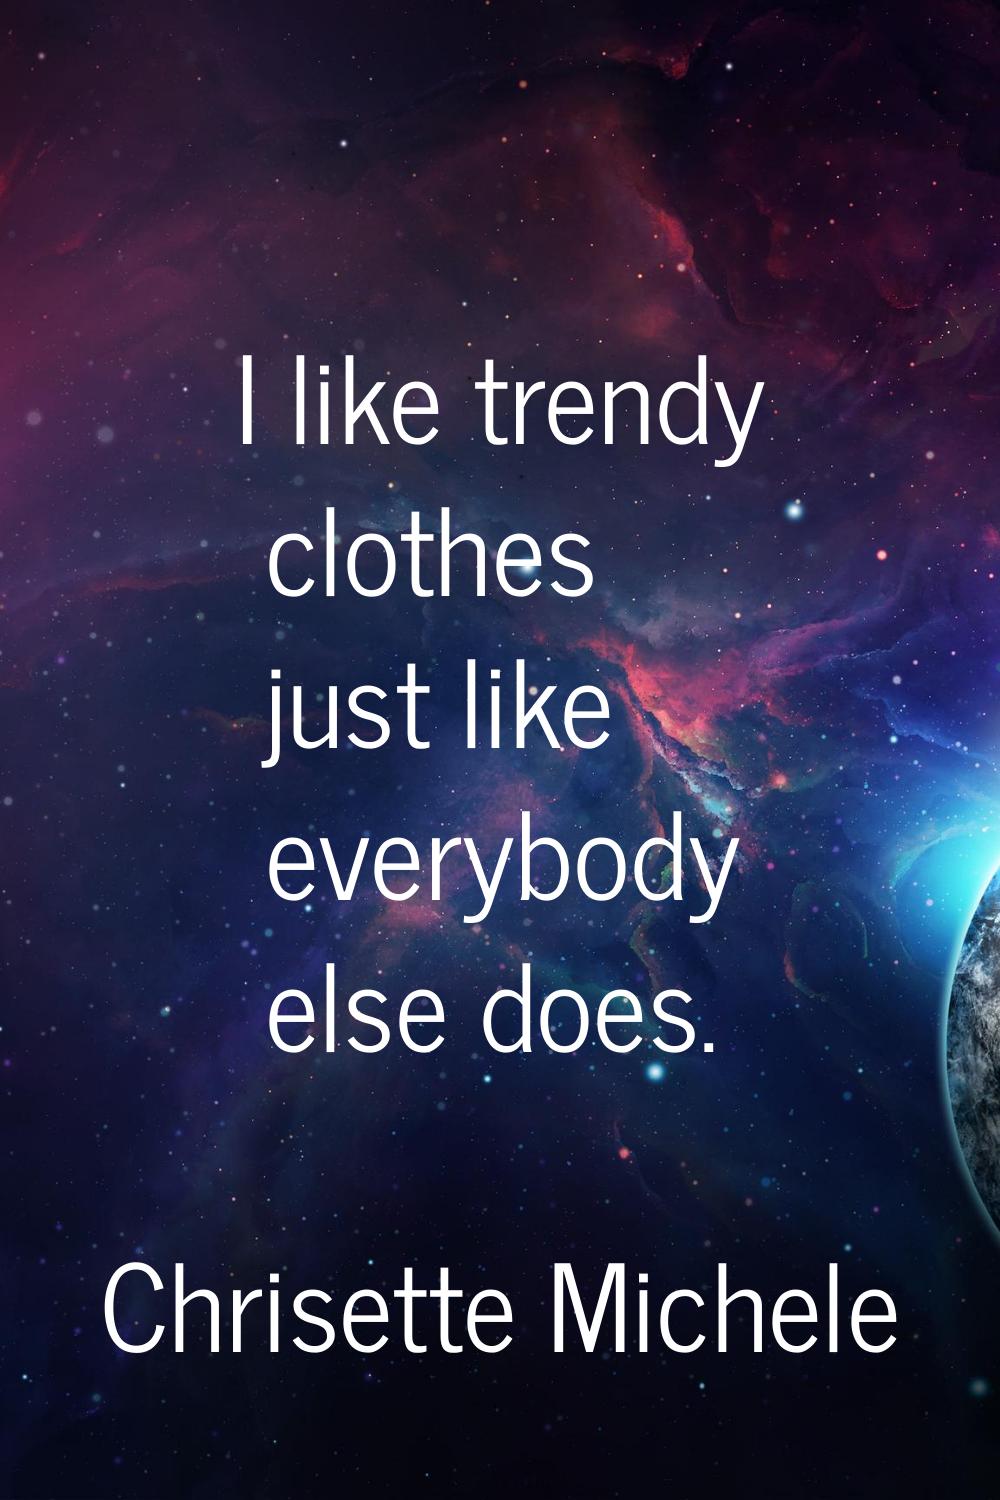 I like trendy clothes just like everybody else does.